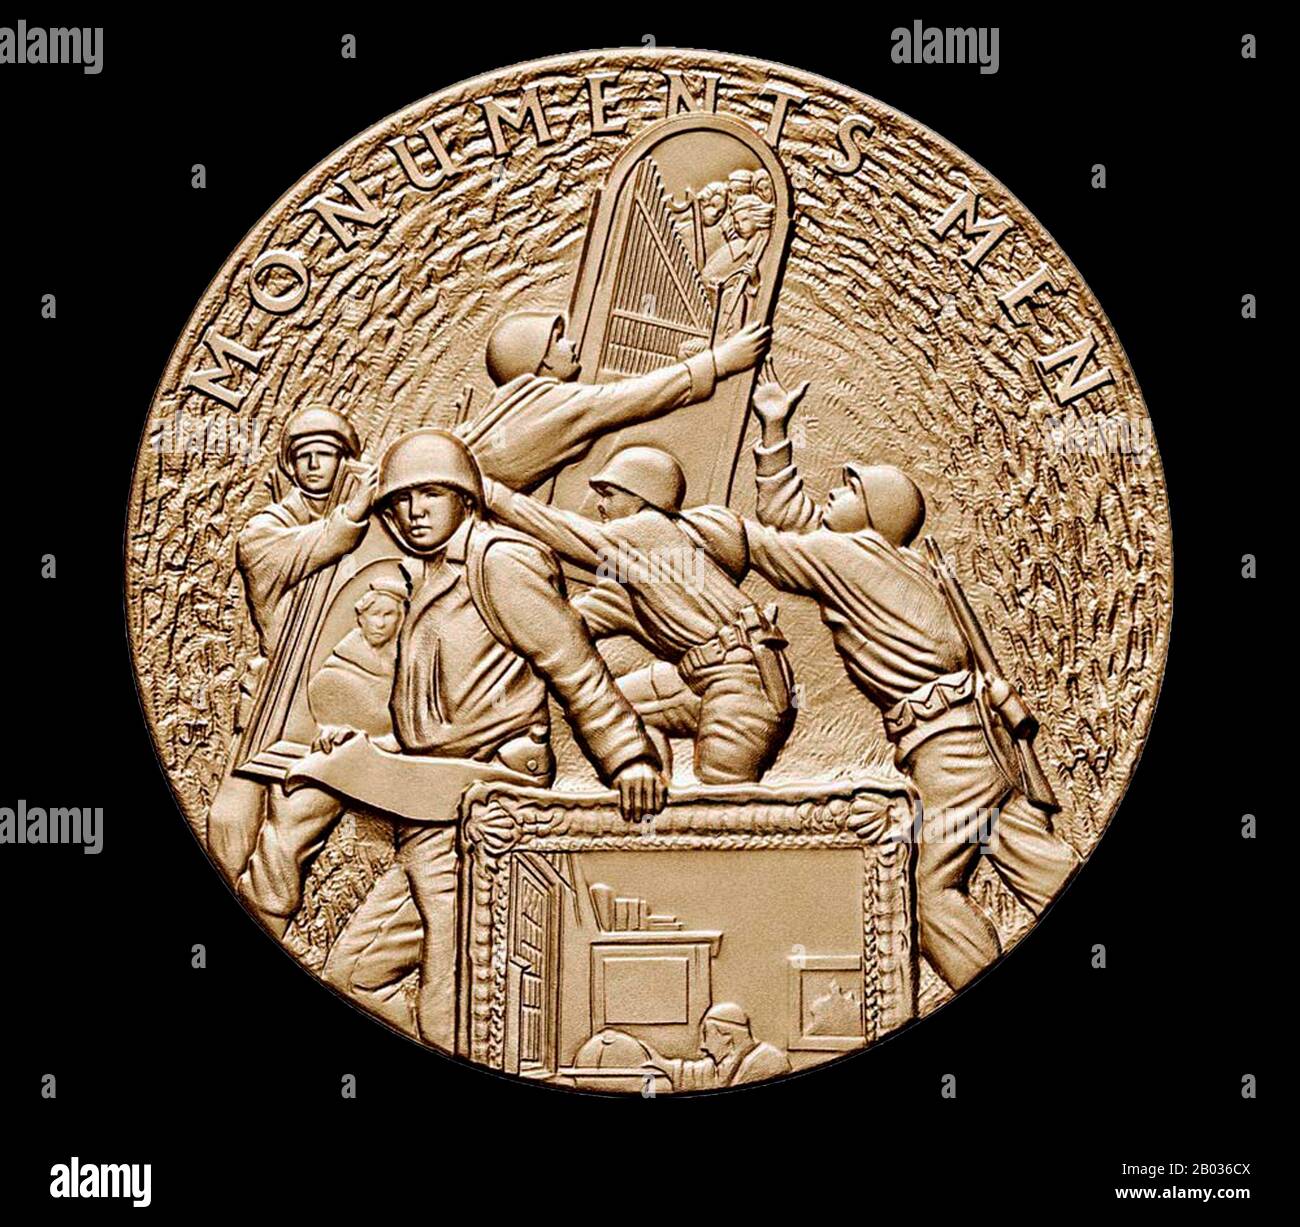 'Nazi plunder' refers to art theft and other items stolen as a result of the organized looting of European countries during the time of the Third Reich by agents acting on behalf of the ruling Nazi Party of Germany. Plundering occurred from 1933 until the end of World War II, although most plunder was acquired during the war. In addition to gold, silver and currency, cultural items of great significance were stolen, including paintings, ceramics, books, and religious treasures.  Although most of these items were recovered by agents of the Monuments, Fine Arts, and Archives program (MFAA), affe Stock Photo